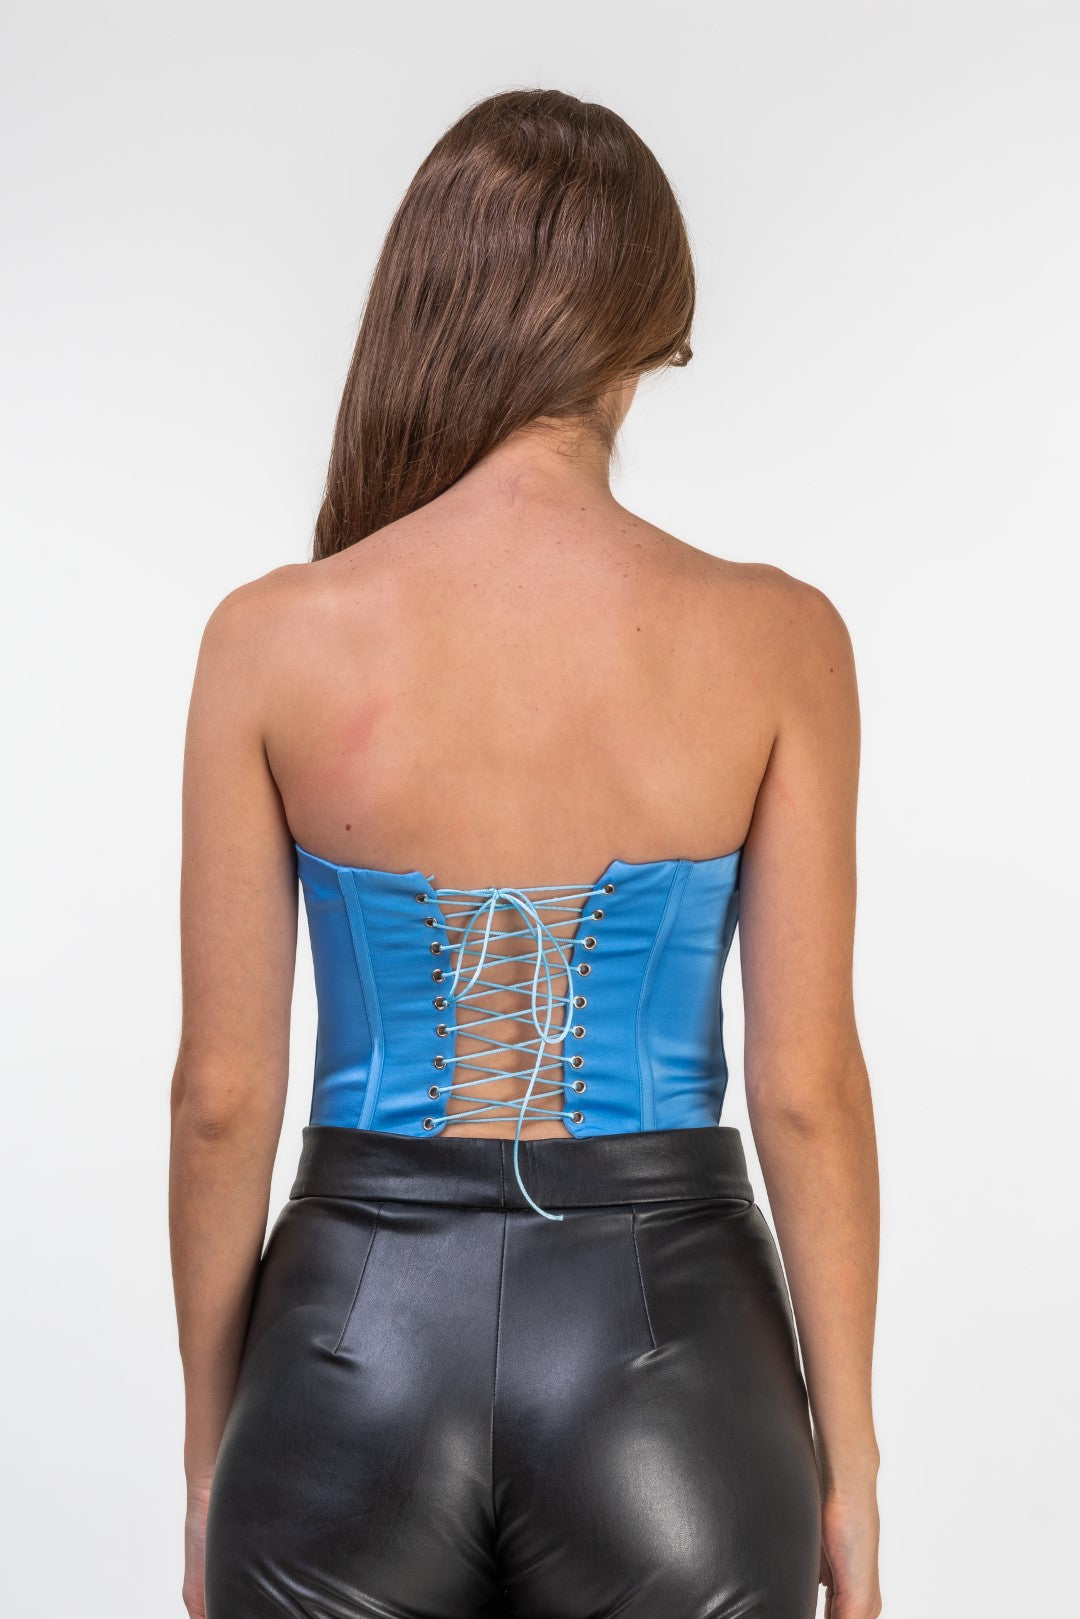 Cropped Corsetry-Inspired Fastens at The Back with Strings